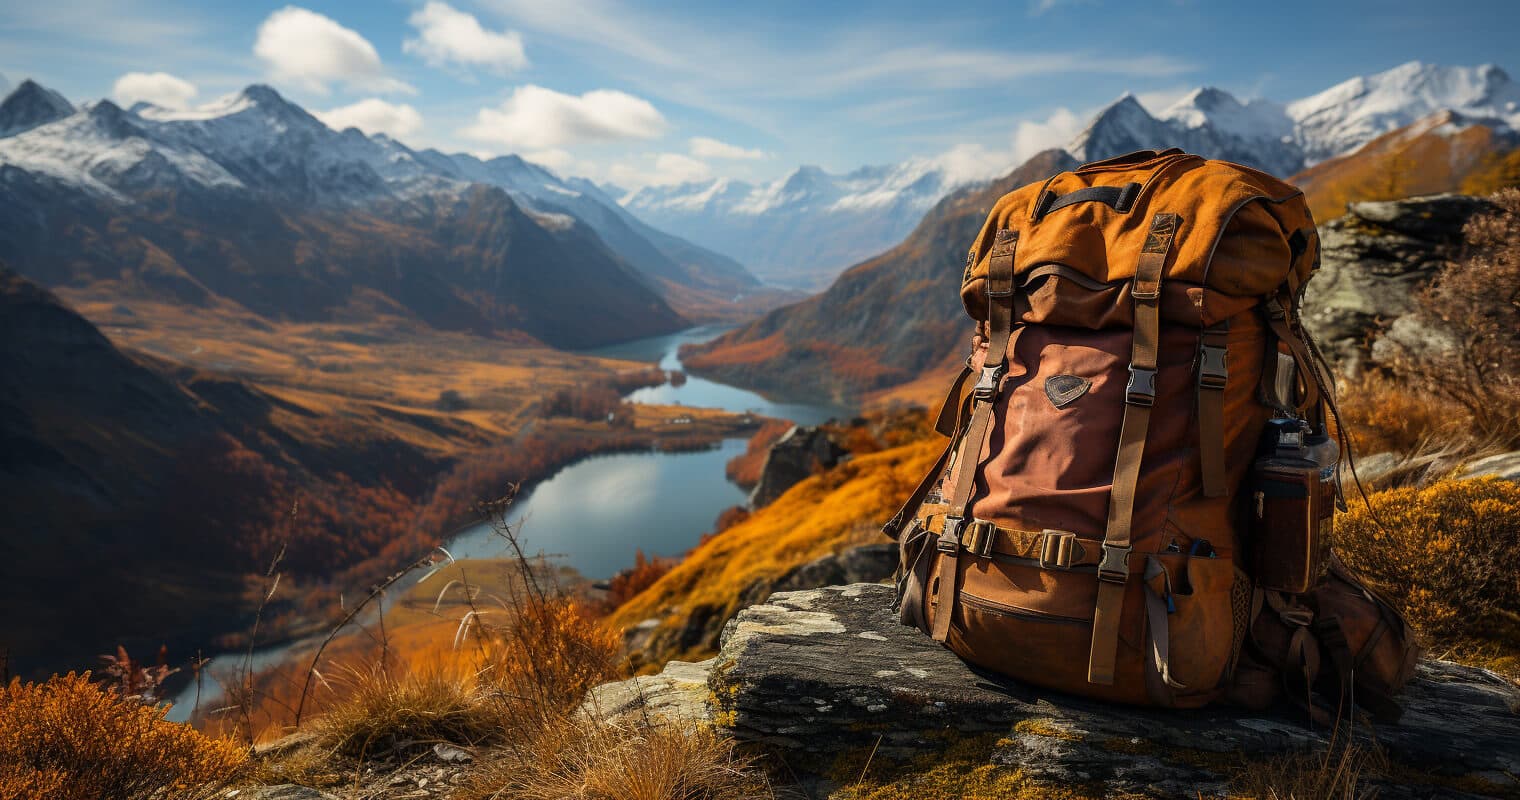 Cover Image for Backpacking Gear List